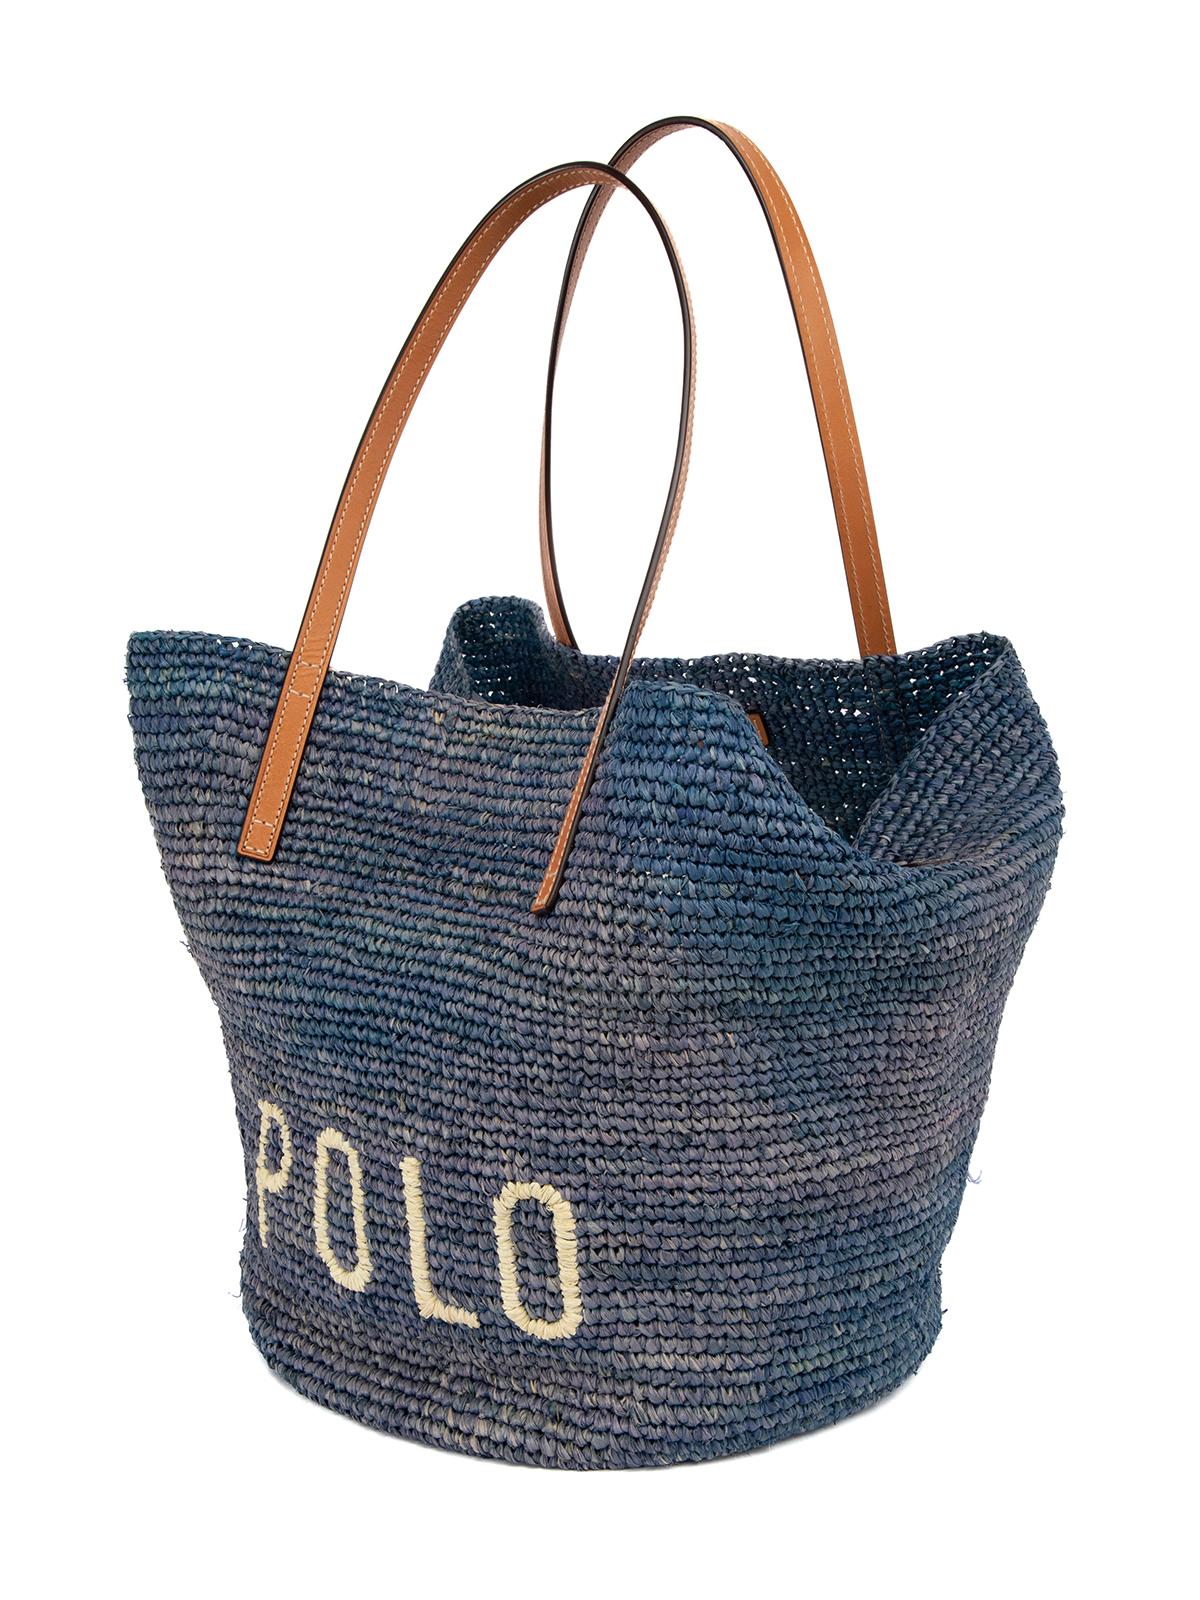 CONDITION is Very Good. Minor wear to bag is evident. Light wear to bag exterior wear loose straw material can be see on this used Polo Ralph Lauren designer resale item. Details Blue Wicker Leather handles One main compartment Composition Wicker,